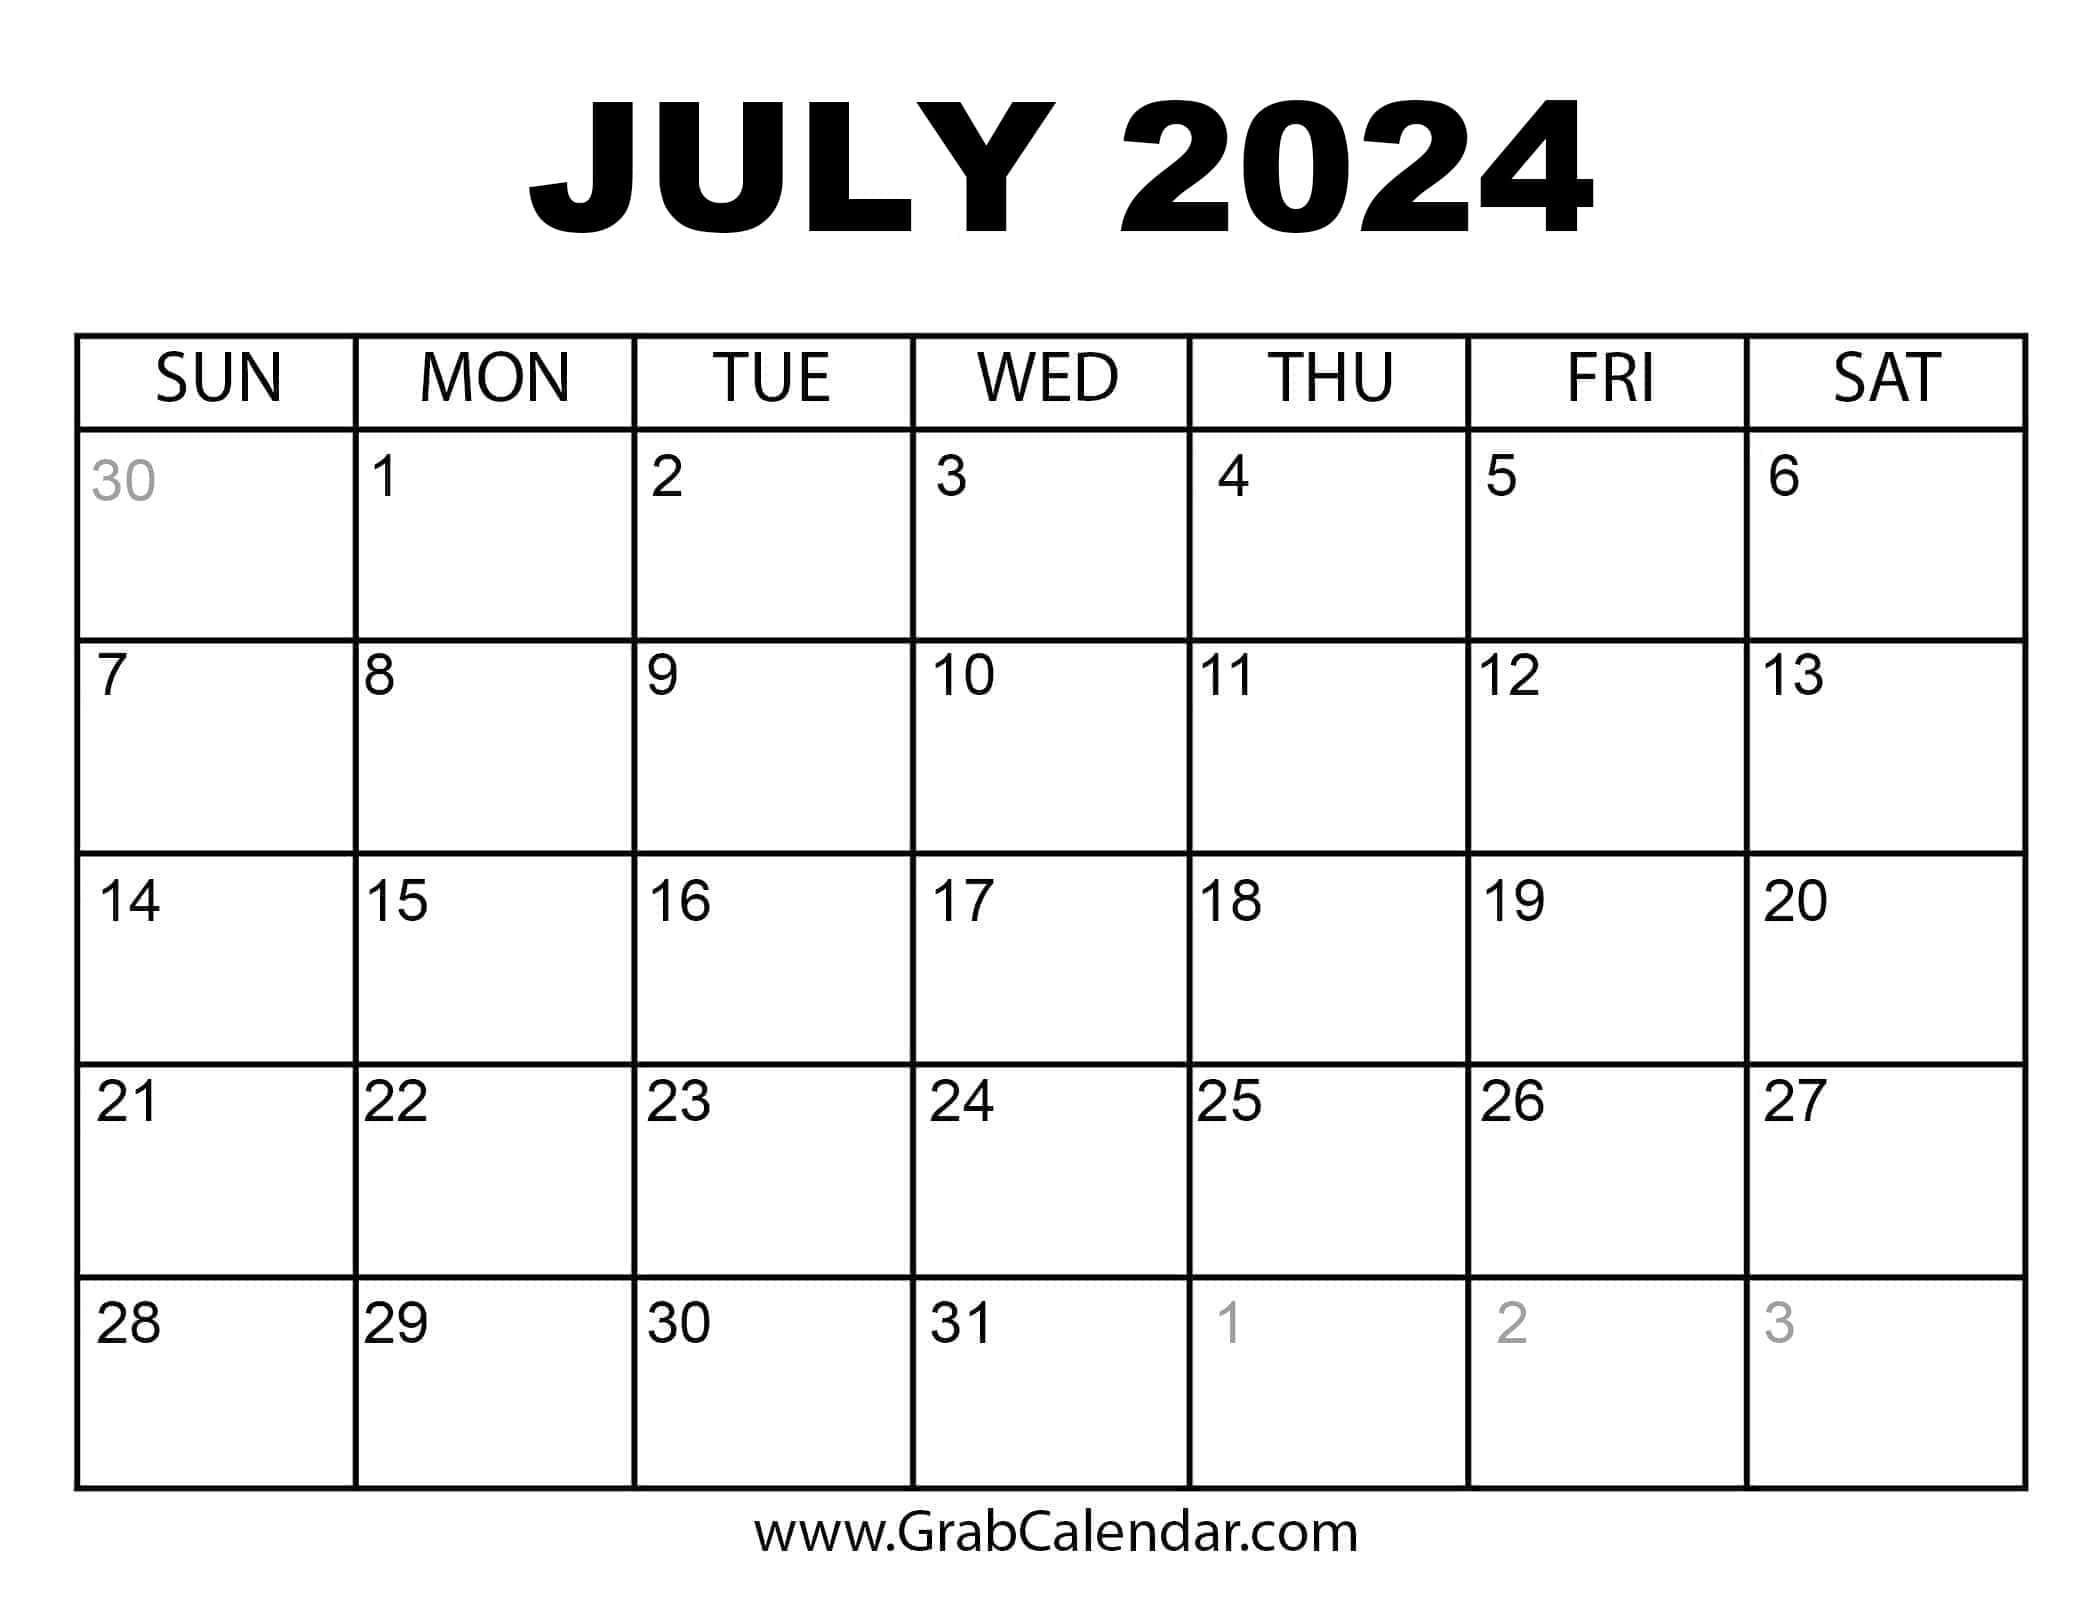 Printable July 2024 Calendar with regard to Give Me the Calendar For July 2024